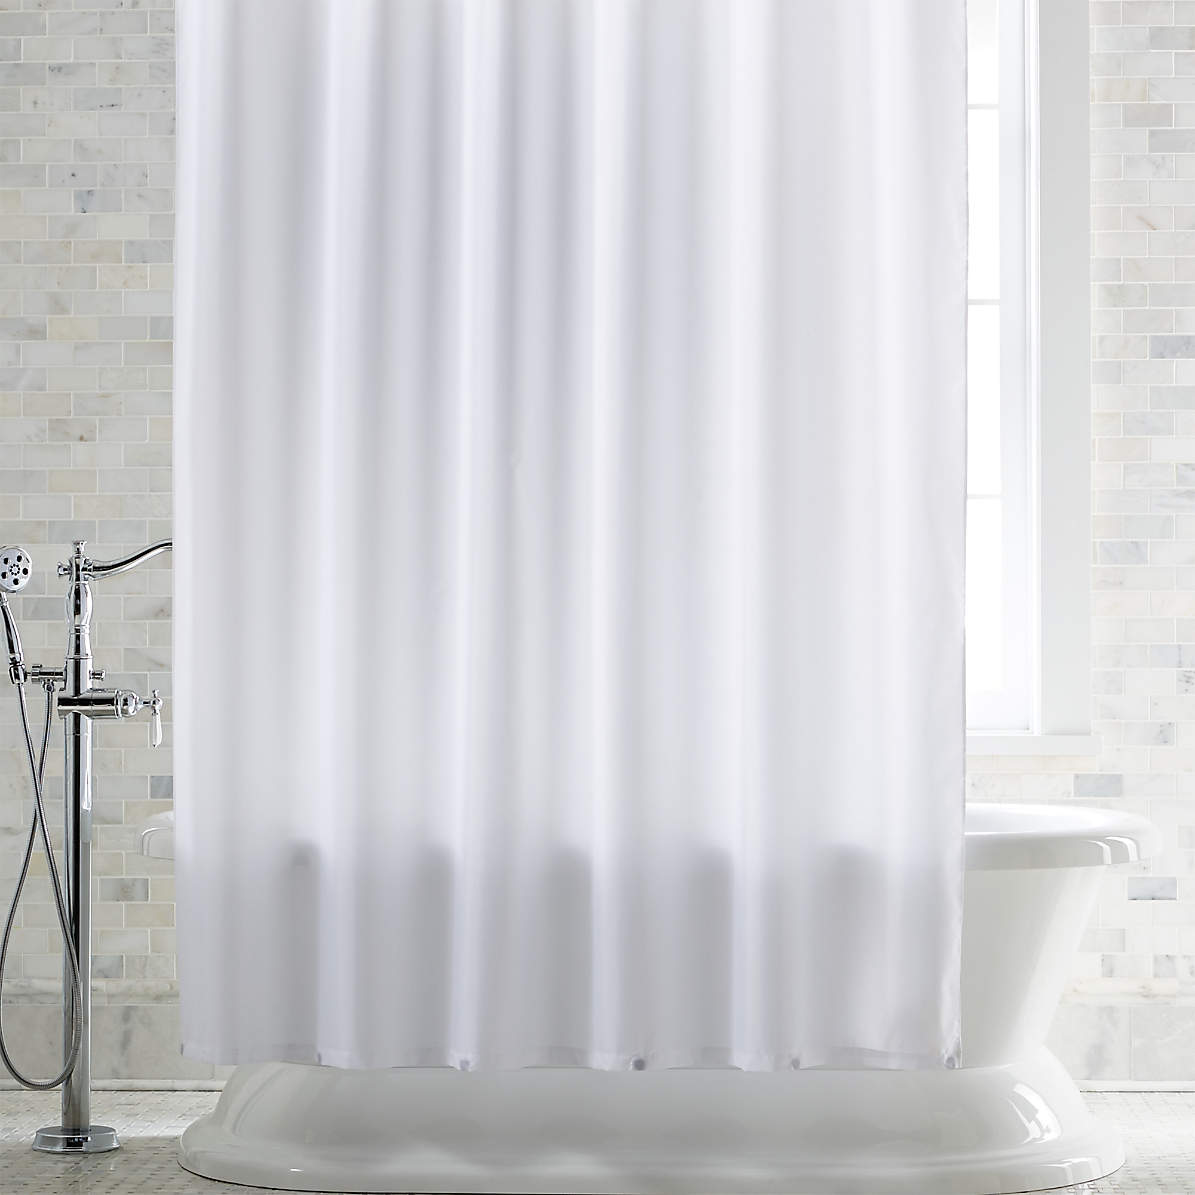 White Shower Curtain Liner With Magnets, What Shower Curtain Material Does Not Need A Liner